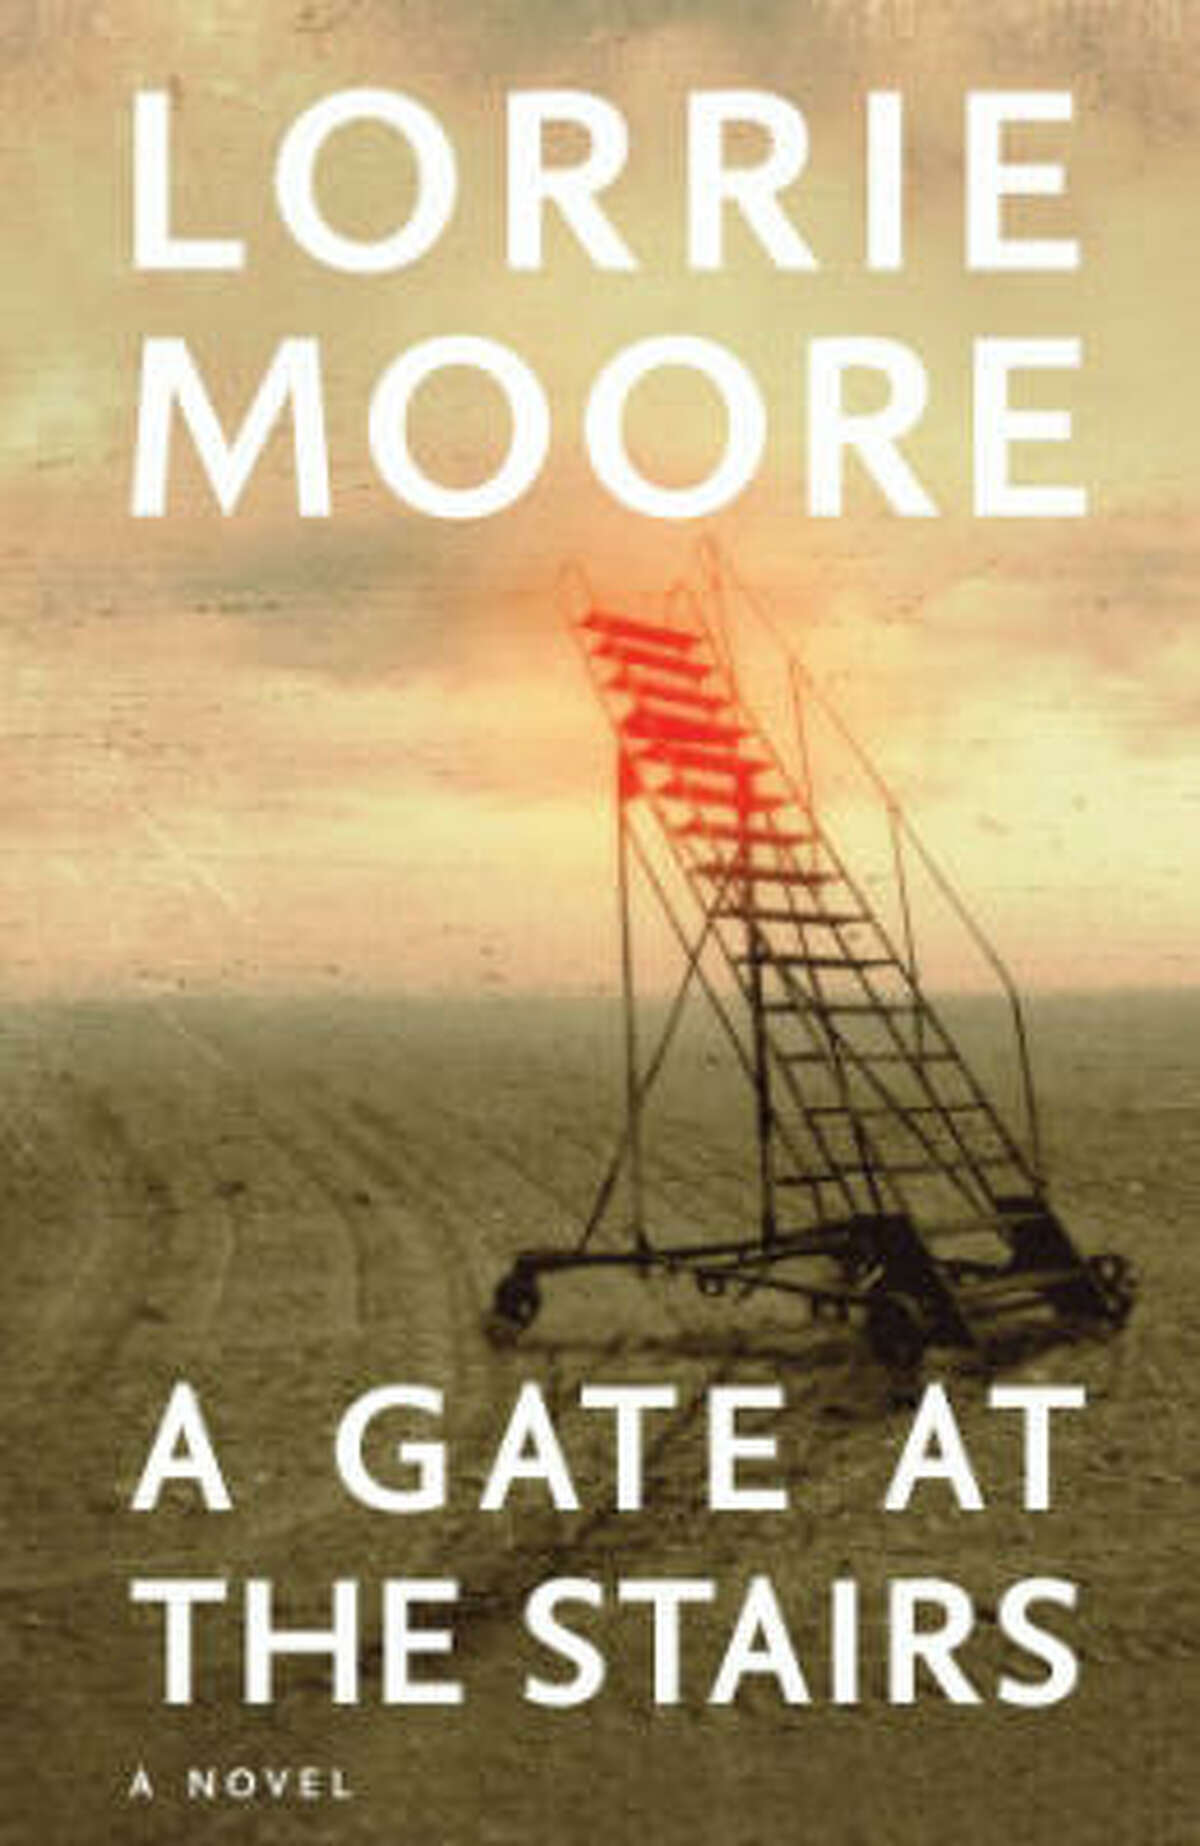 A Gate at the Stairs, by Lorrie Moore